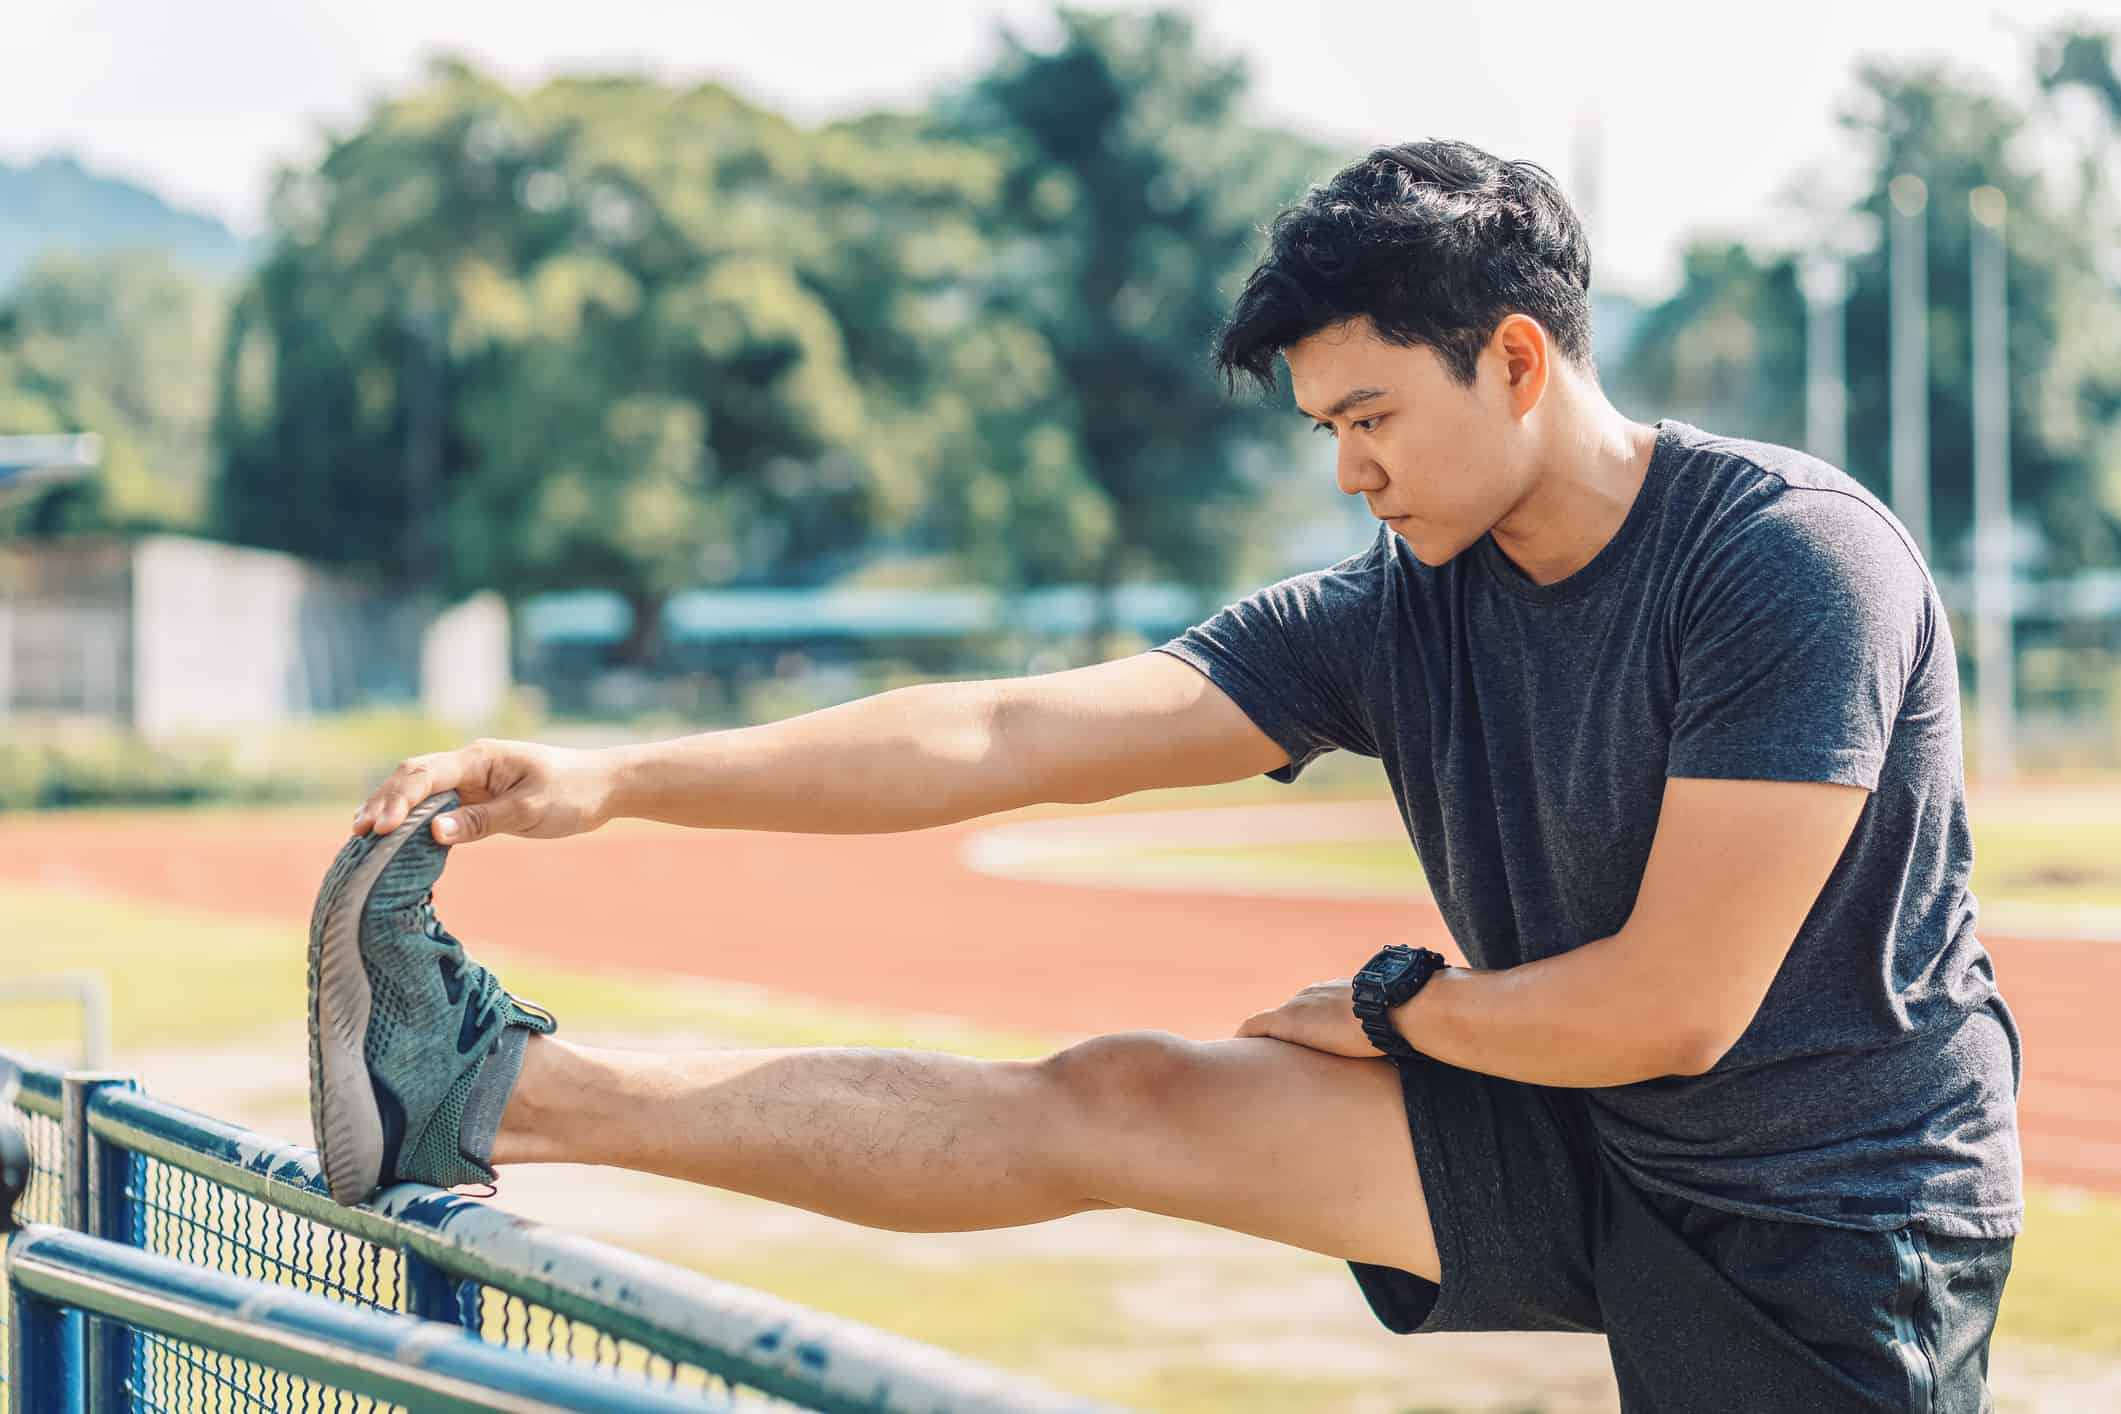 A man stretching before running.